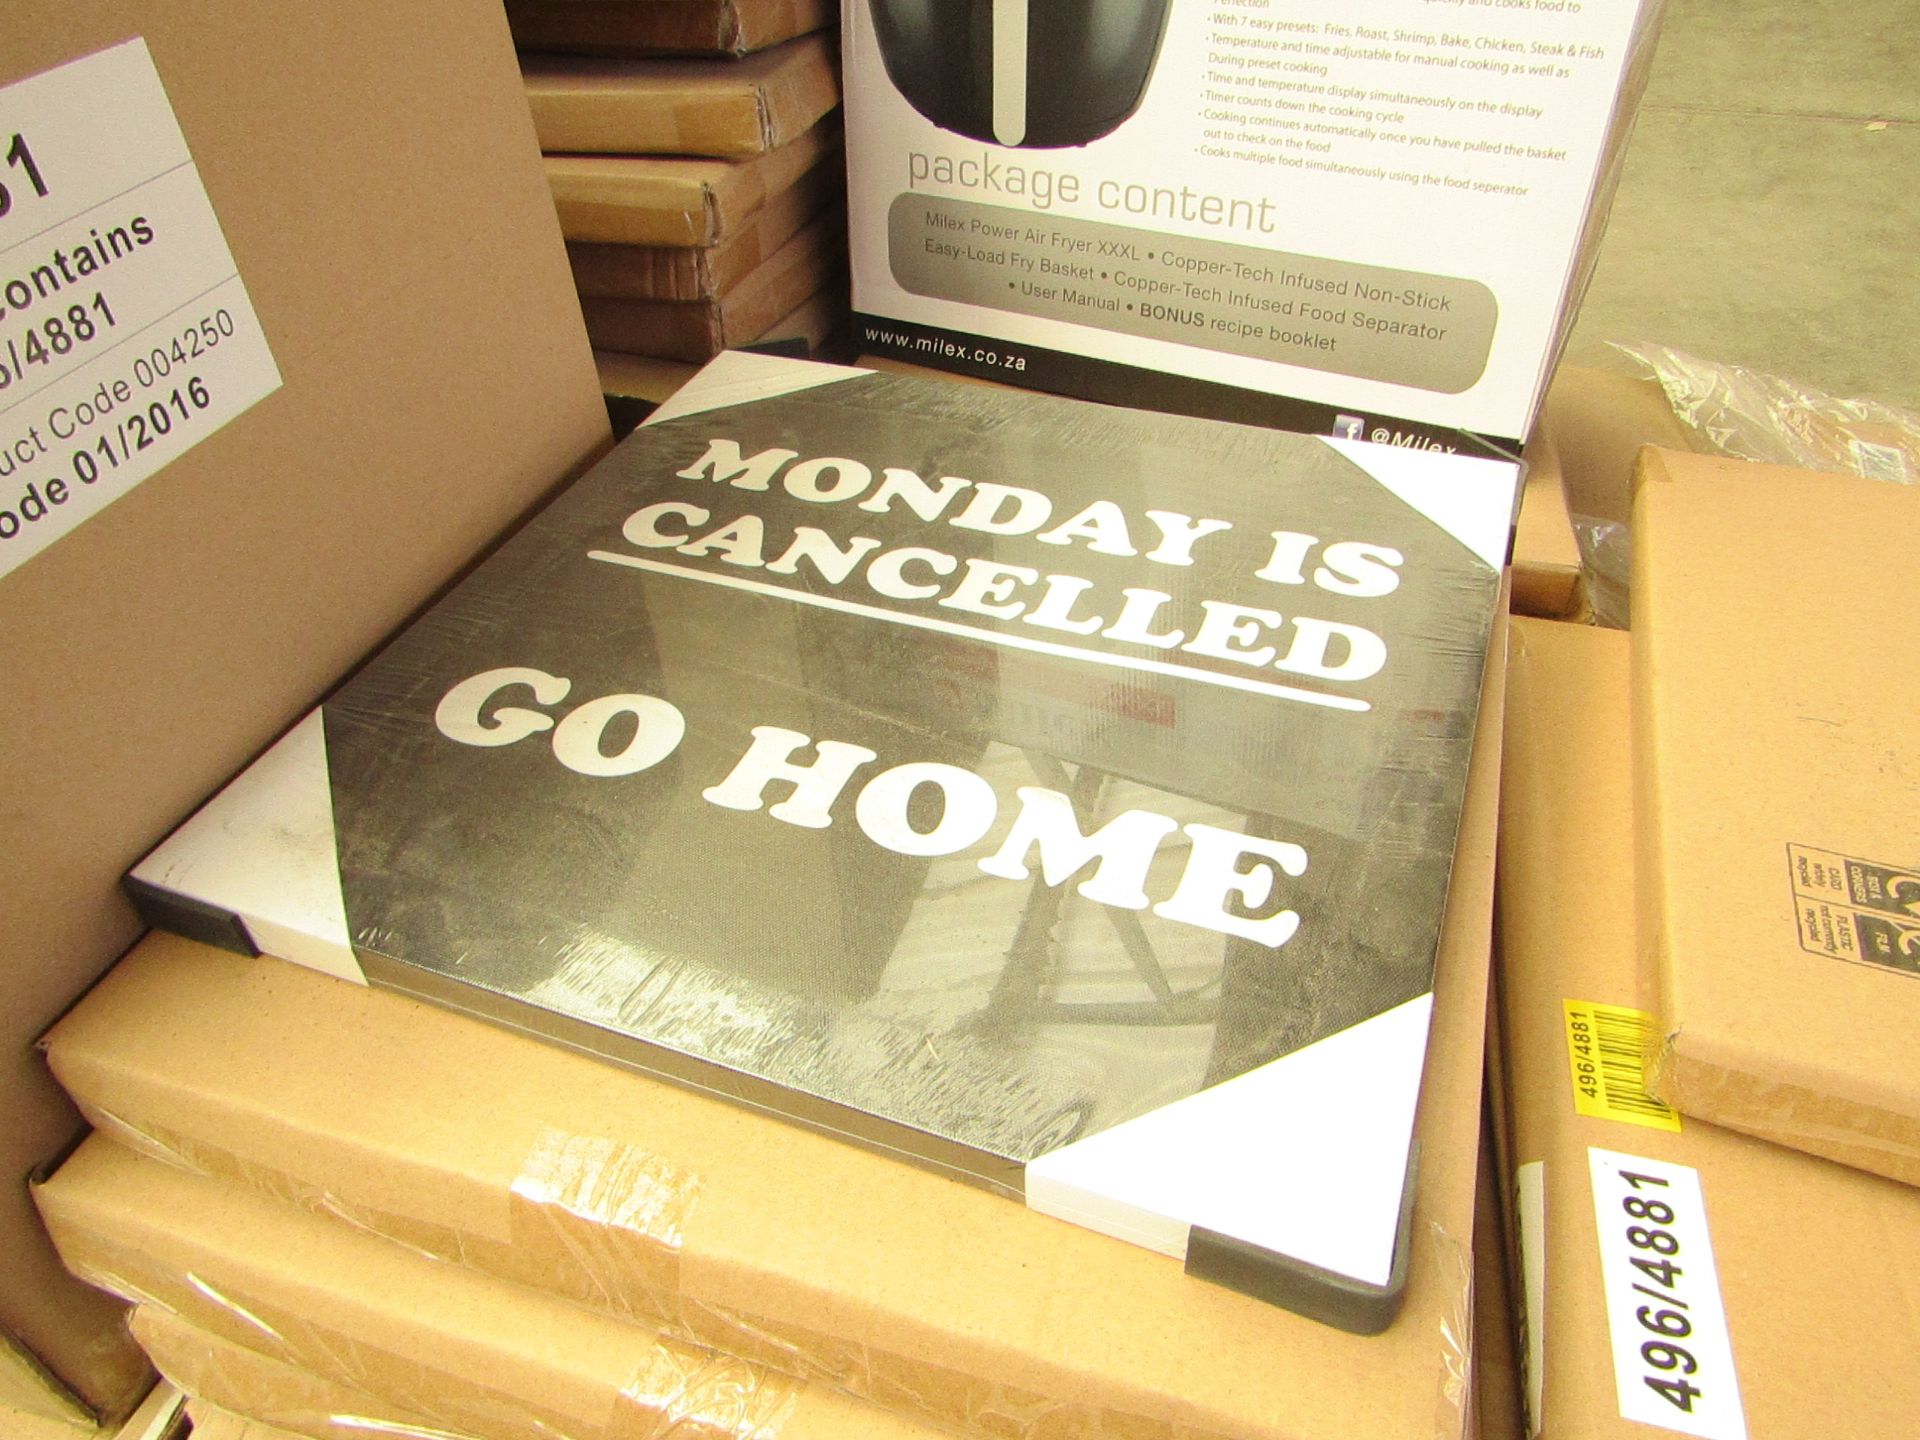 20x Home canvas decorations, "Monday Is Cancelled Go Home"